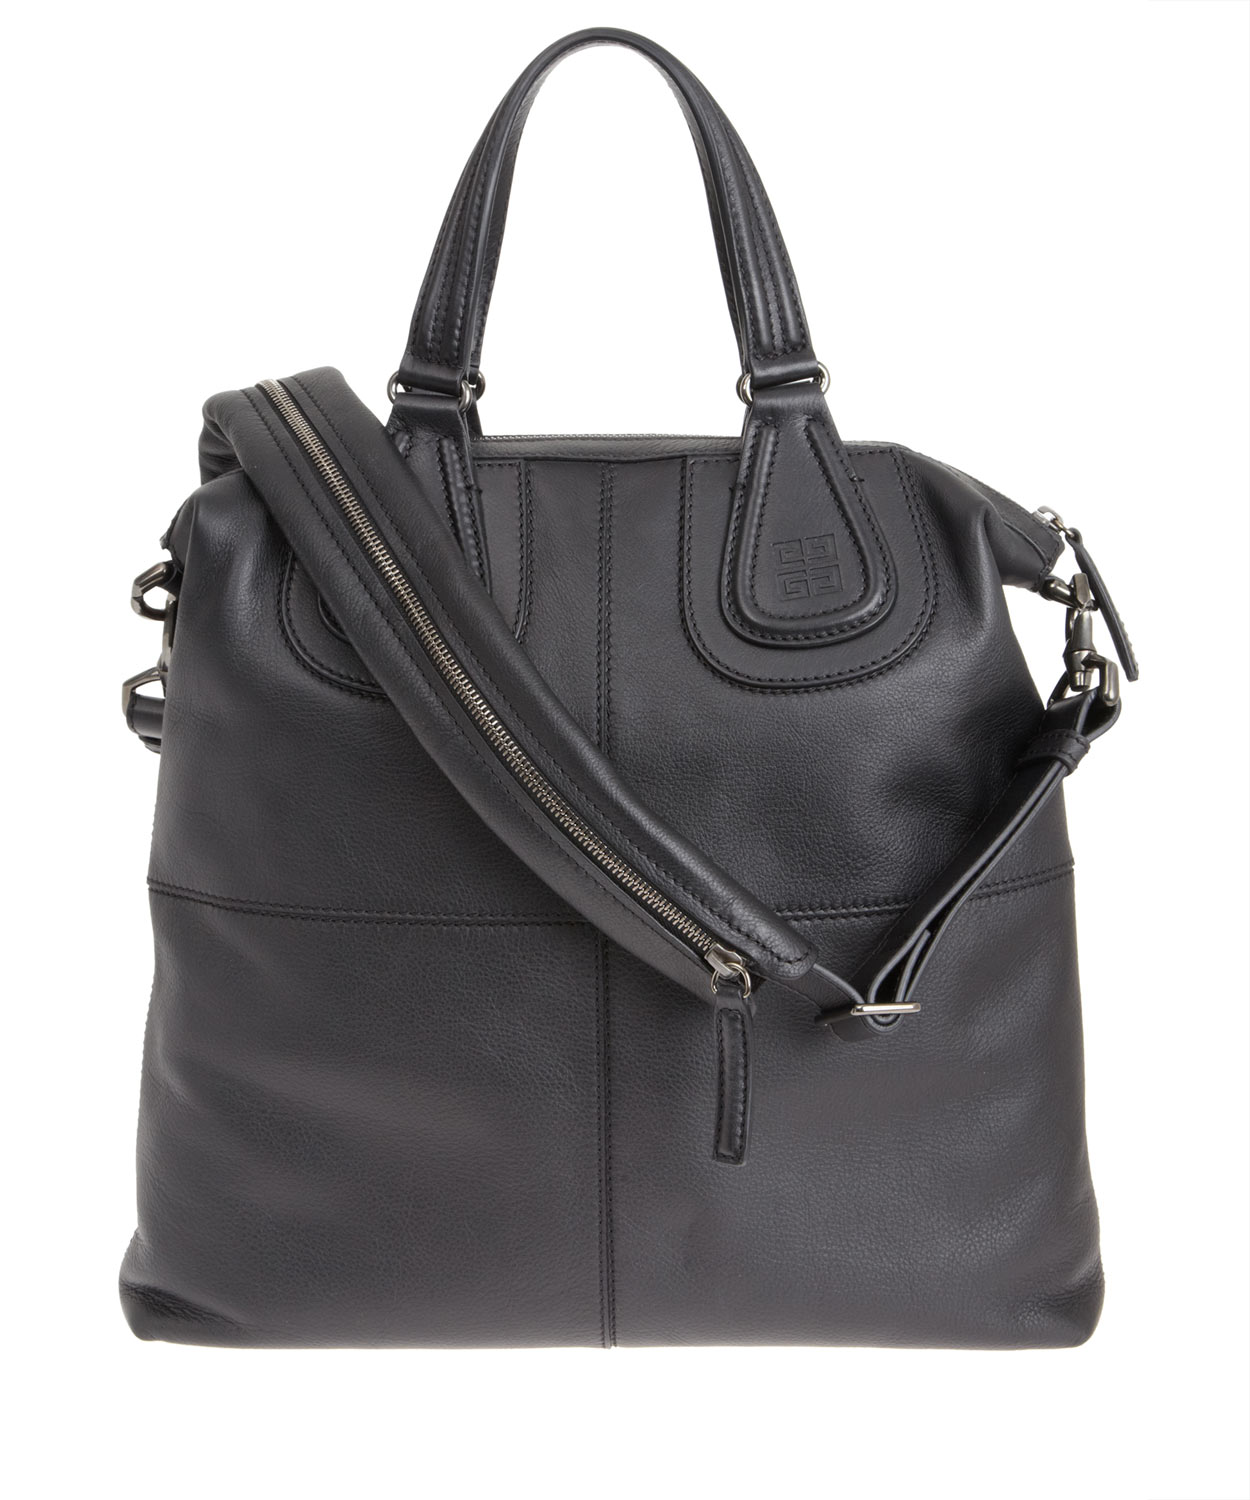 Givenchy Black Nightingale Leather Tote Bag for Men - Lyst